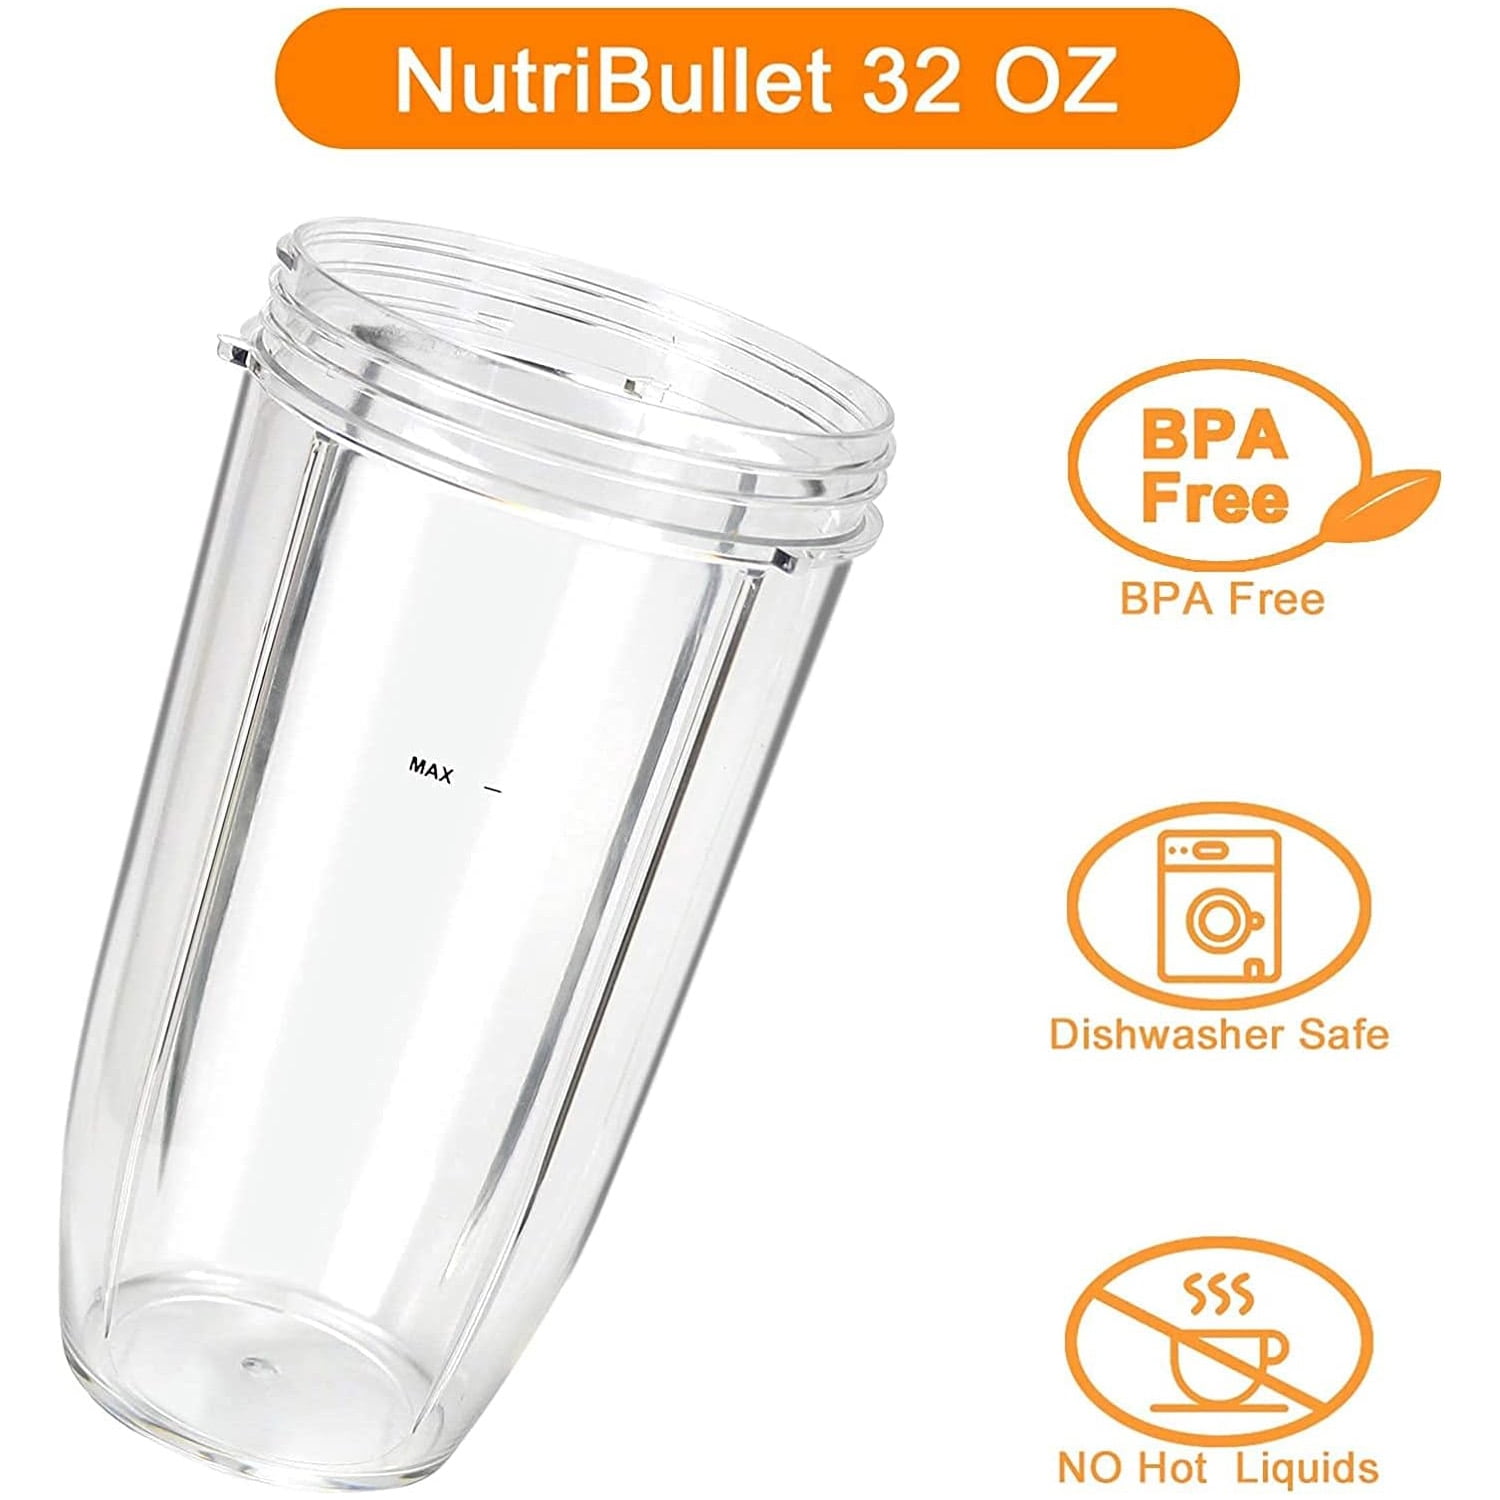 Meet Juice Replacement Parts 32oz Blender Cups (2 Packs) Replacement Blender Cups Compatible with Nutribullet 600W and 900W Blender